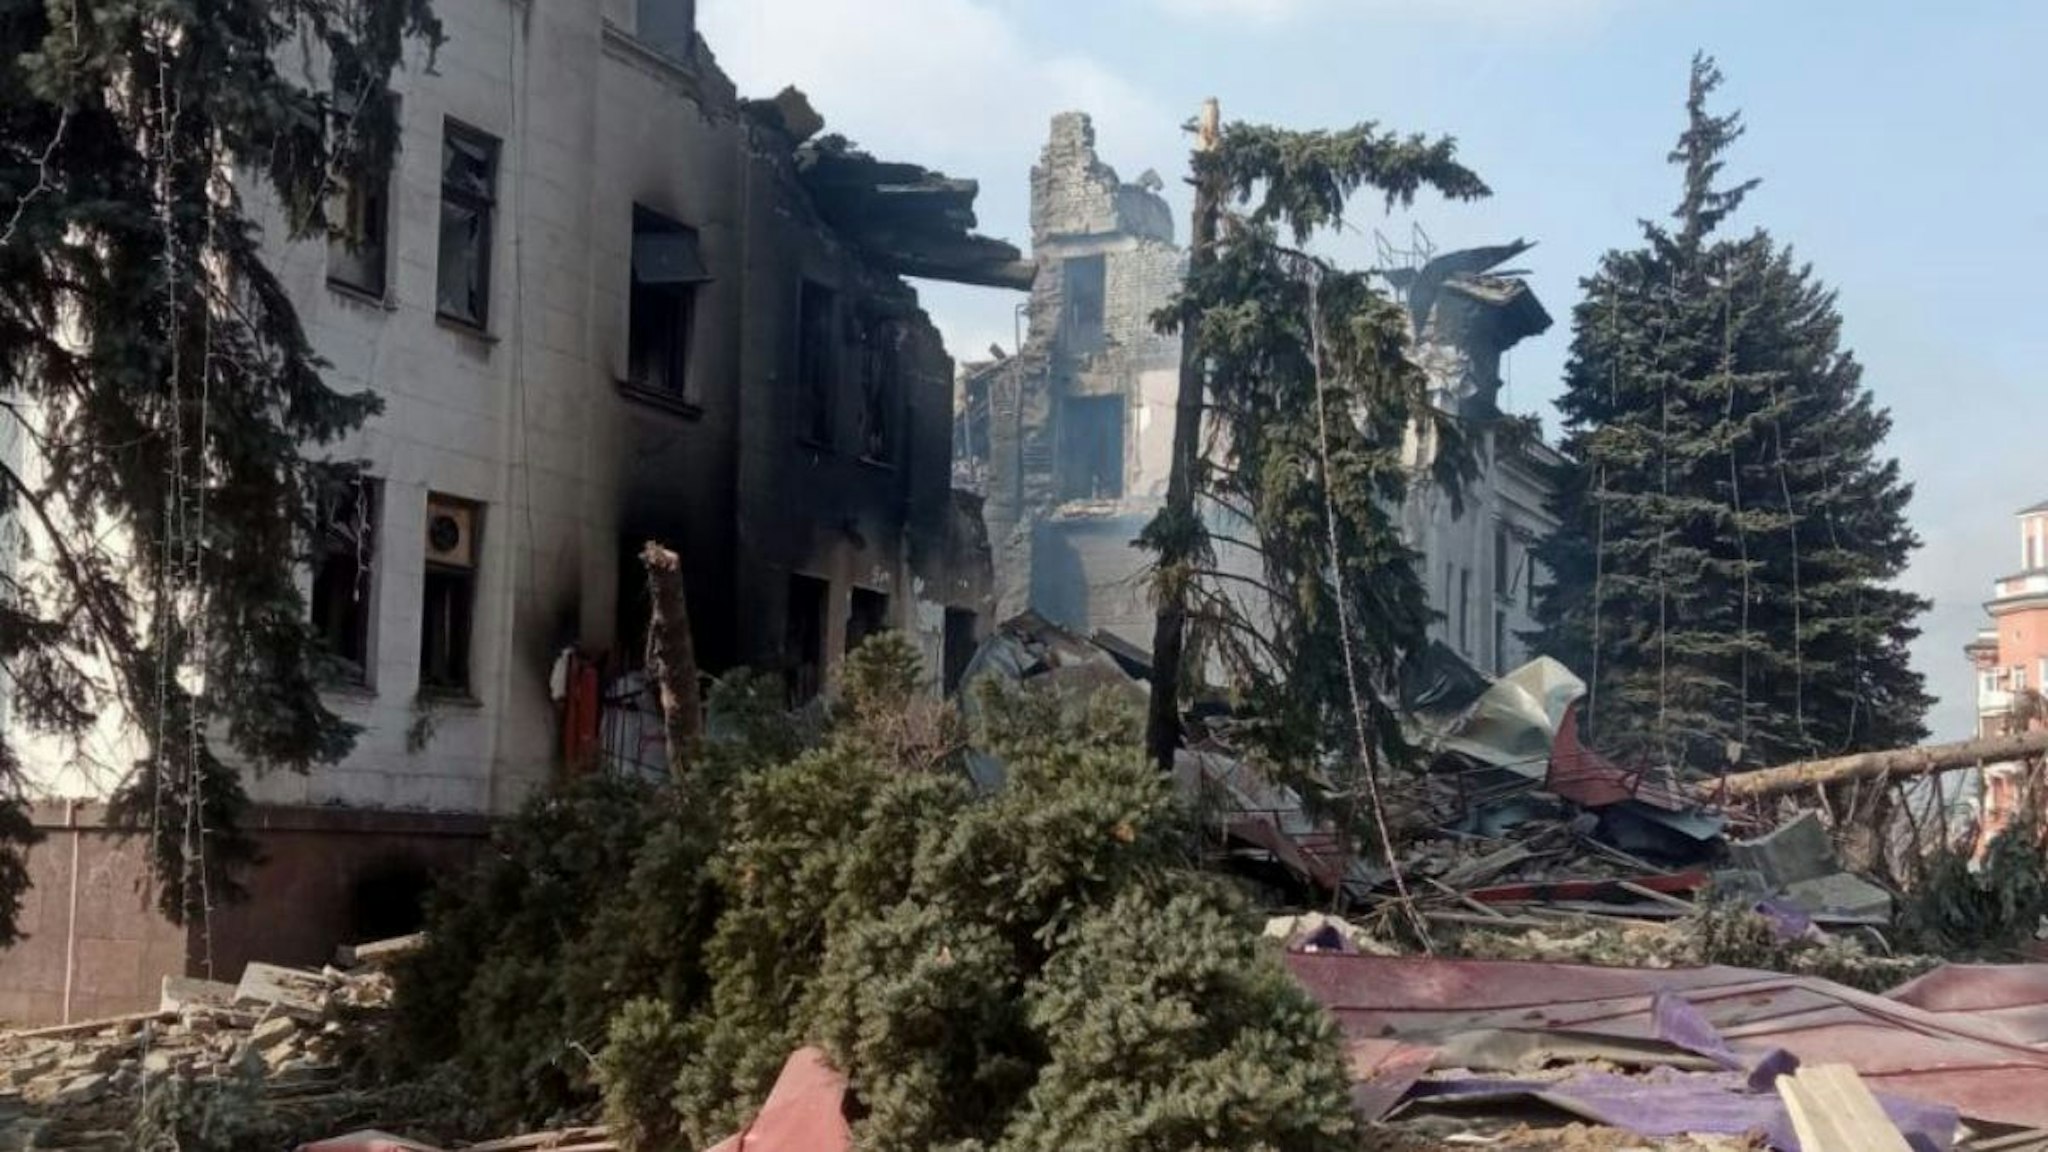 A view of destroyed theatre hall, which was used as a shelter by civilians, after Russian bombardment in Mariupol, Ukraine on March 18, 2022.